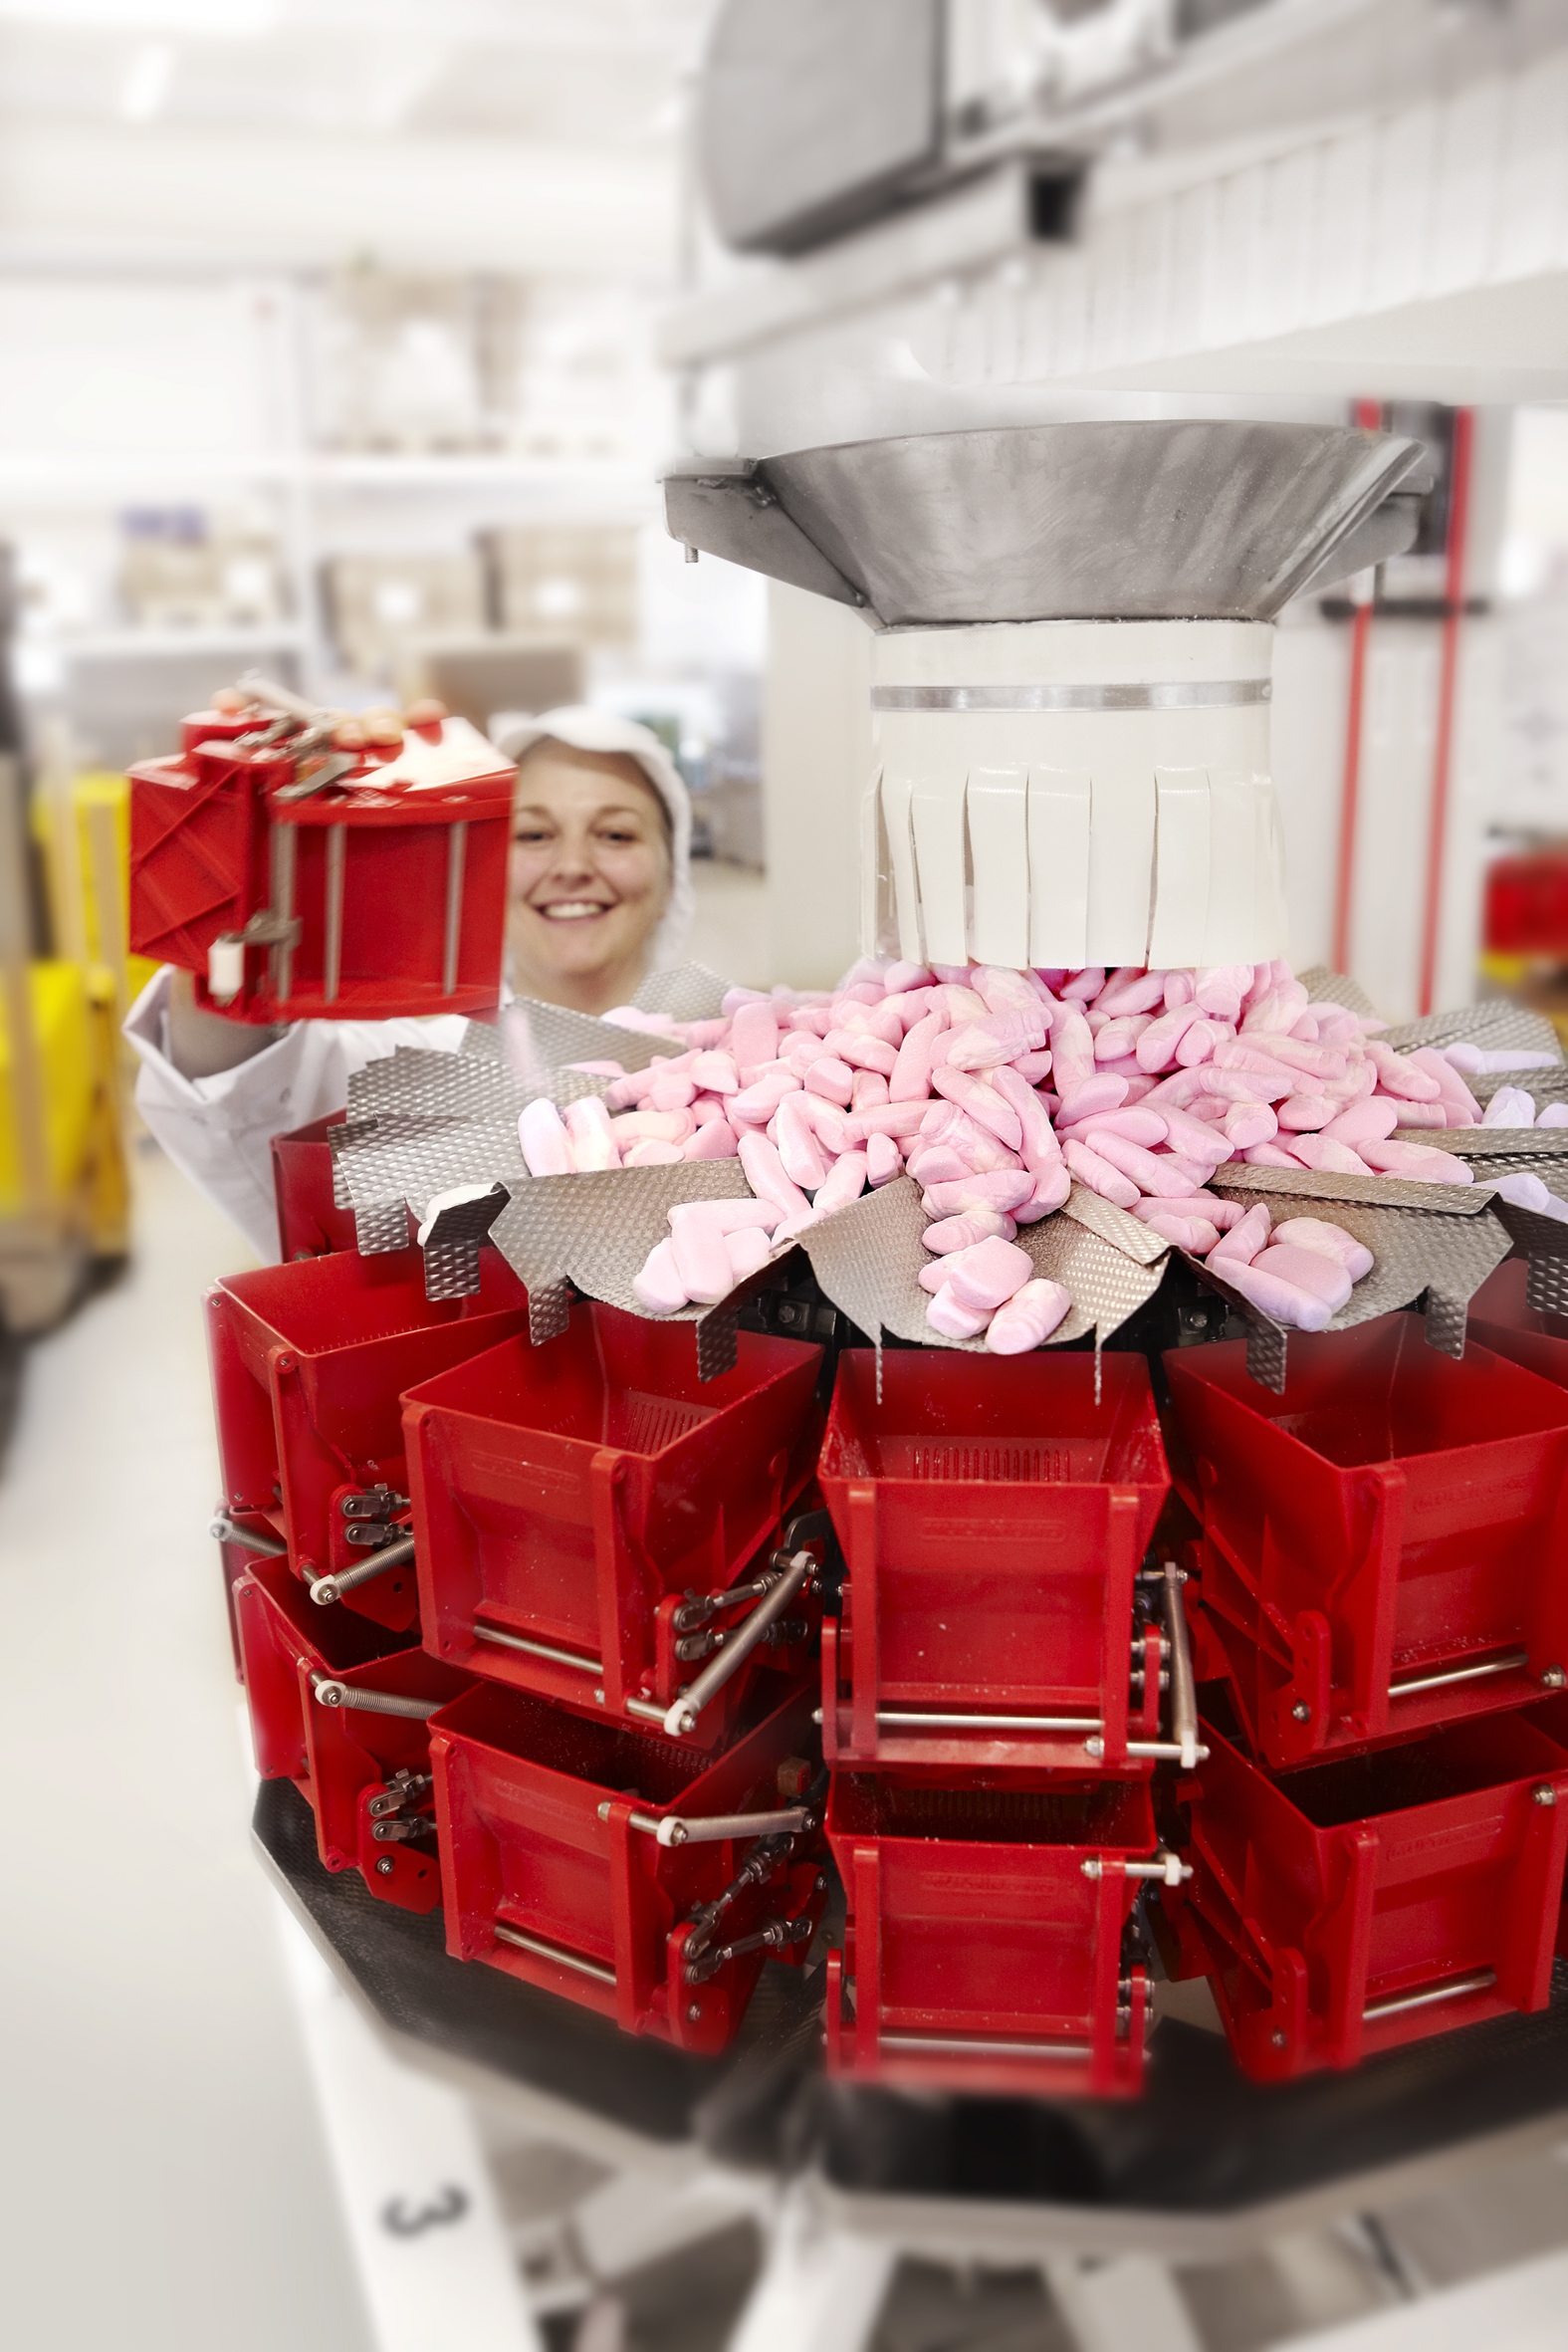 photo of a food production working smiling while making candy